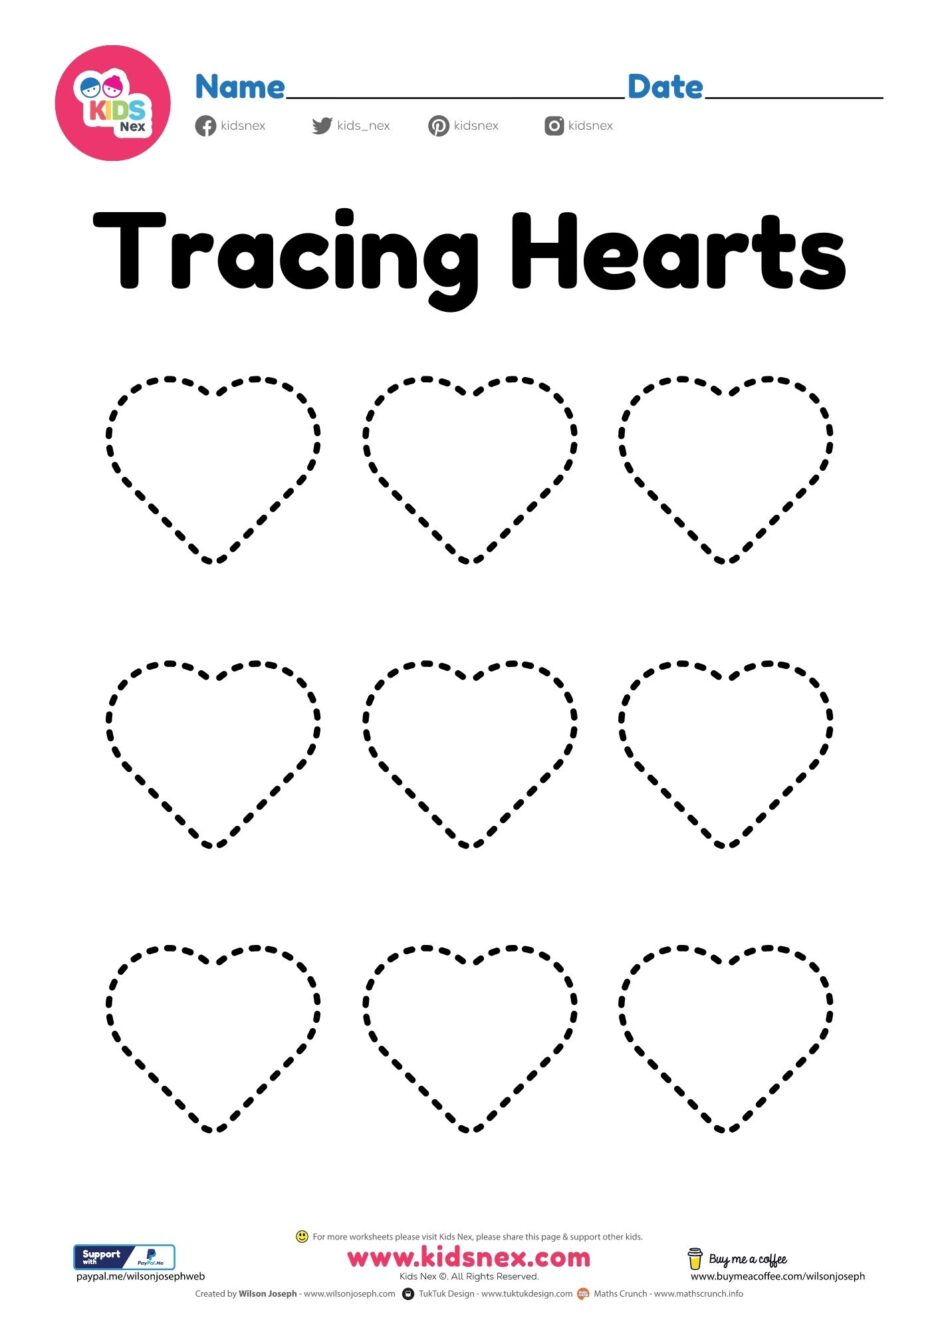 Tracing Hearts Worksheet - Free Printable PDF for Kids